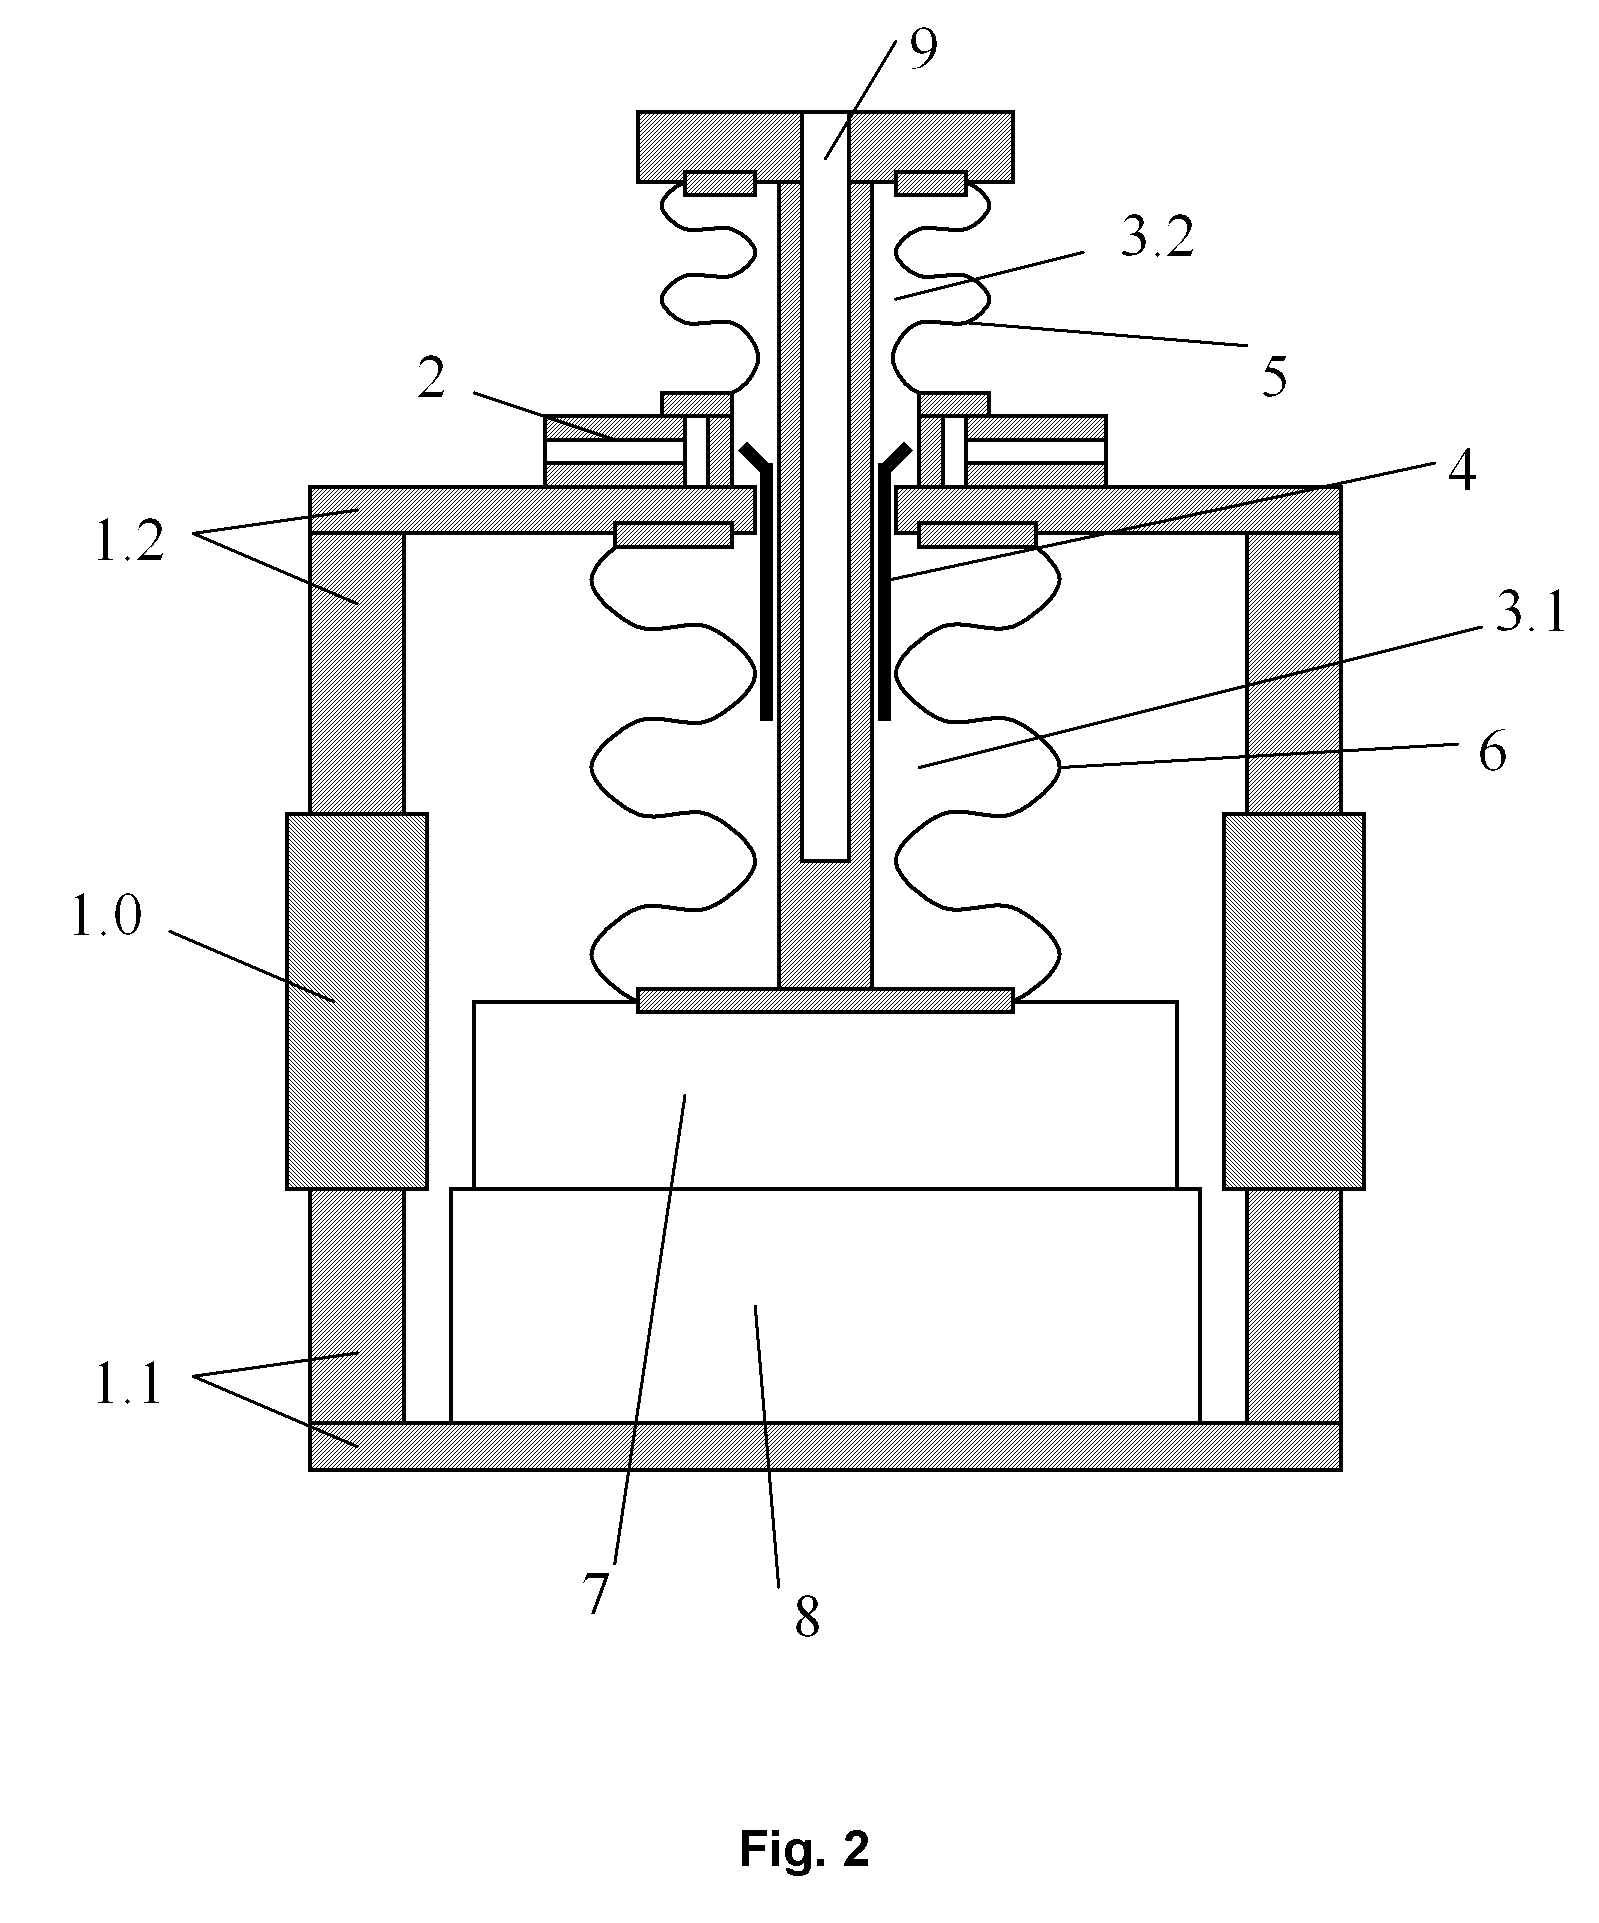 Cooling system for a variable vacuum capacitor